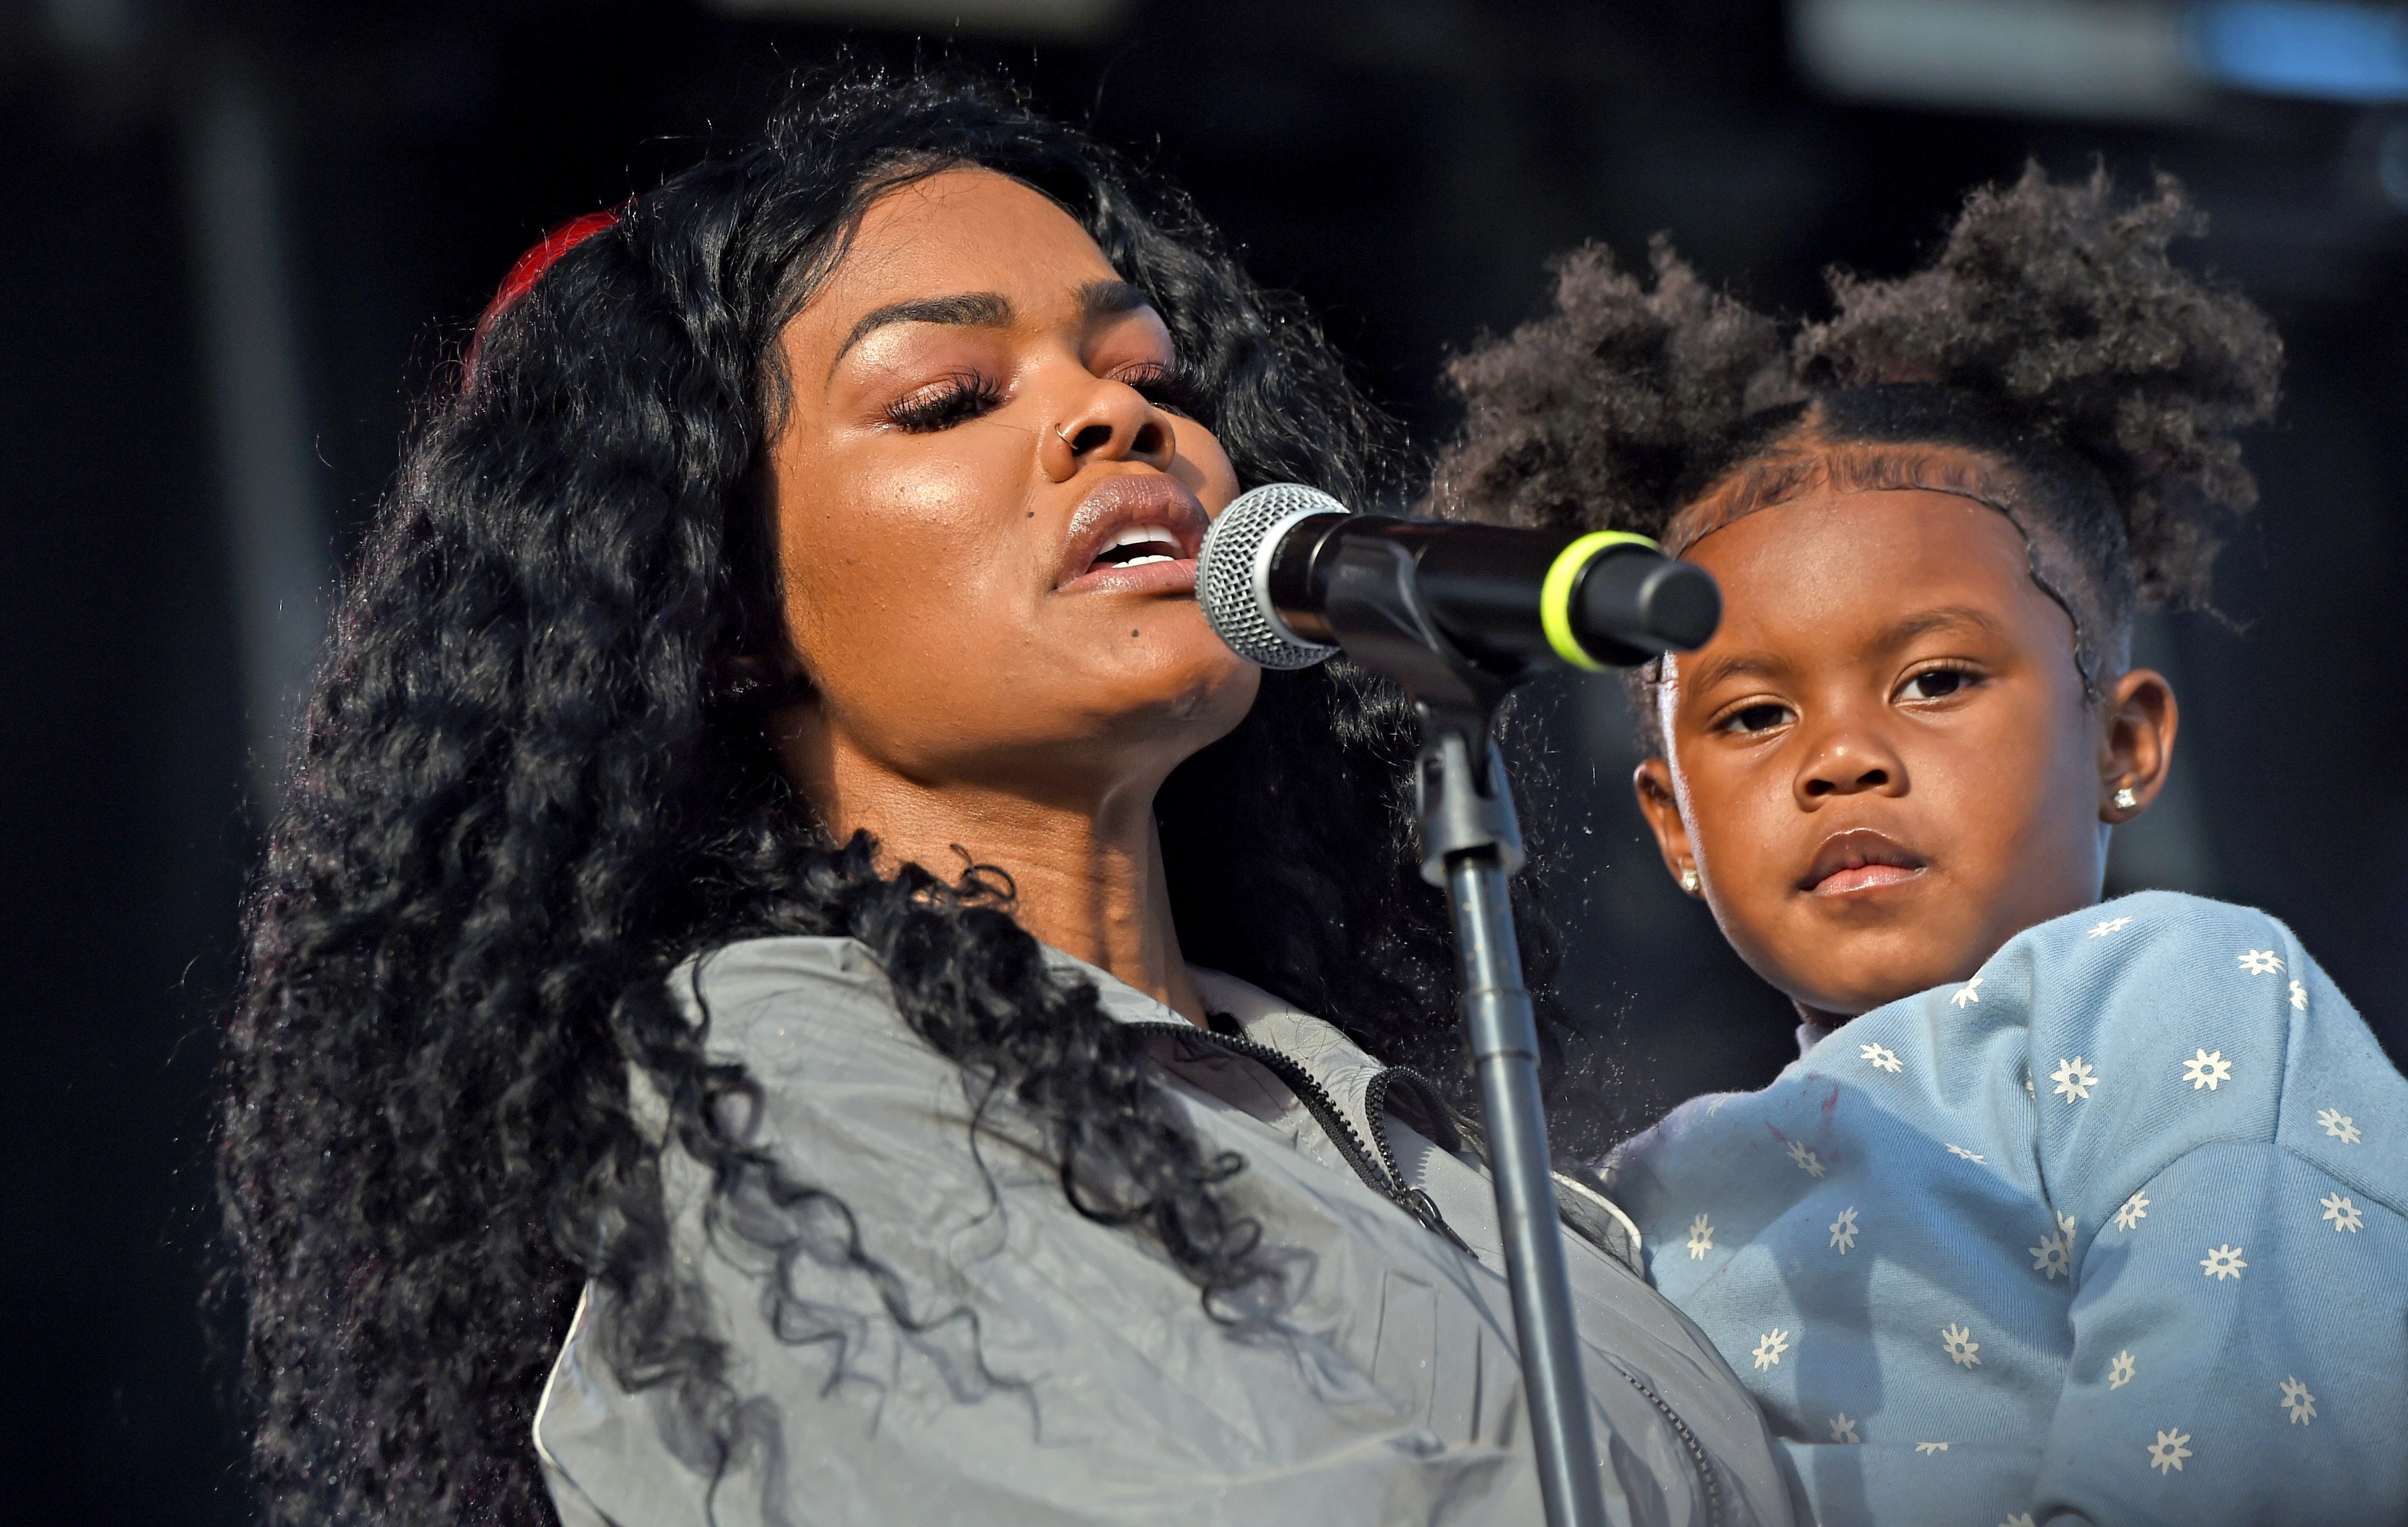 Teyana Taylor and Junie on August 25, 2019 in Dayton, Ohio | Source: Getty Images 